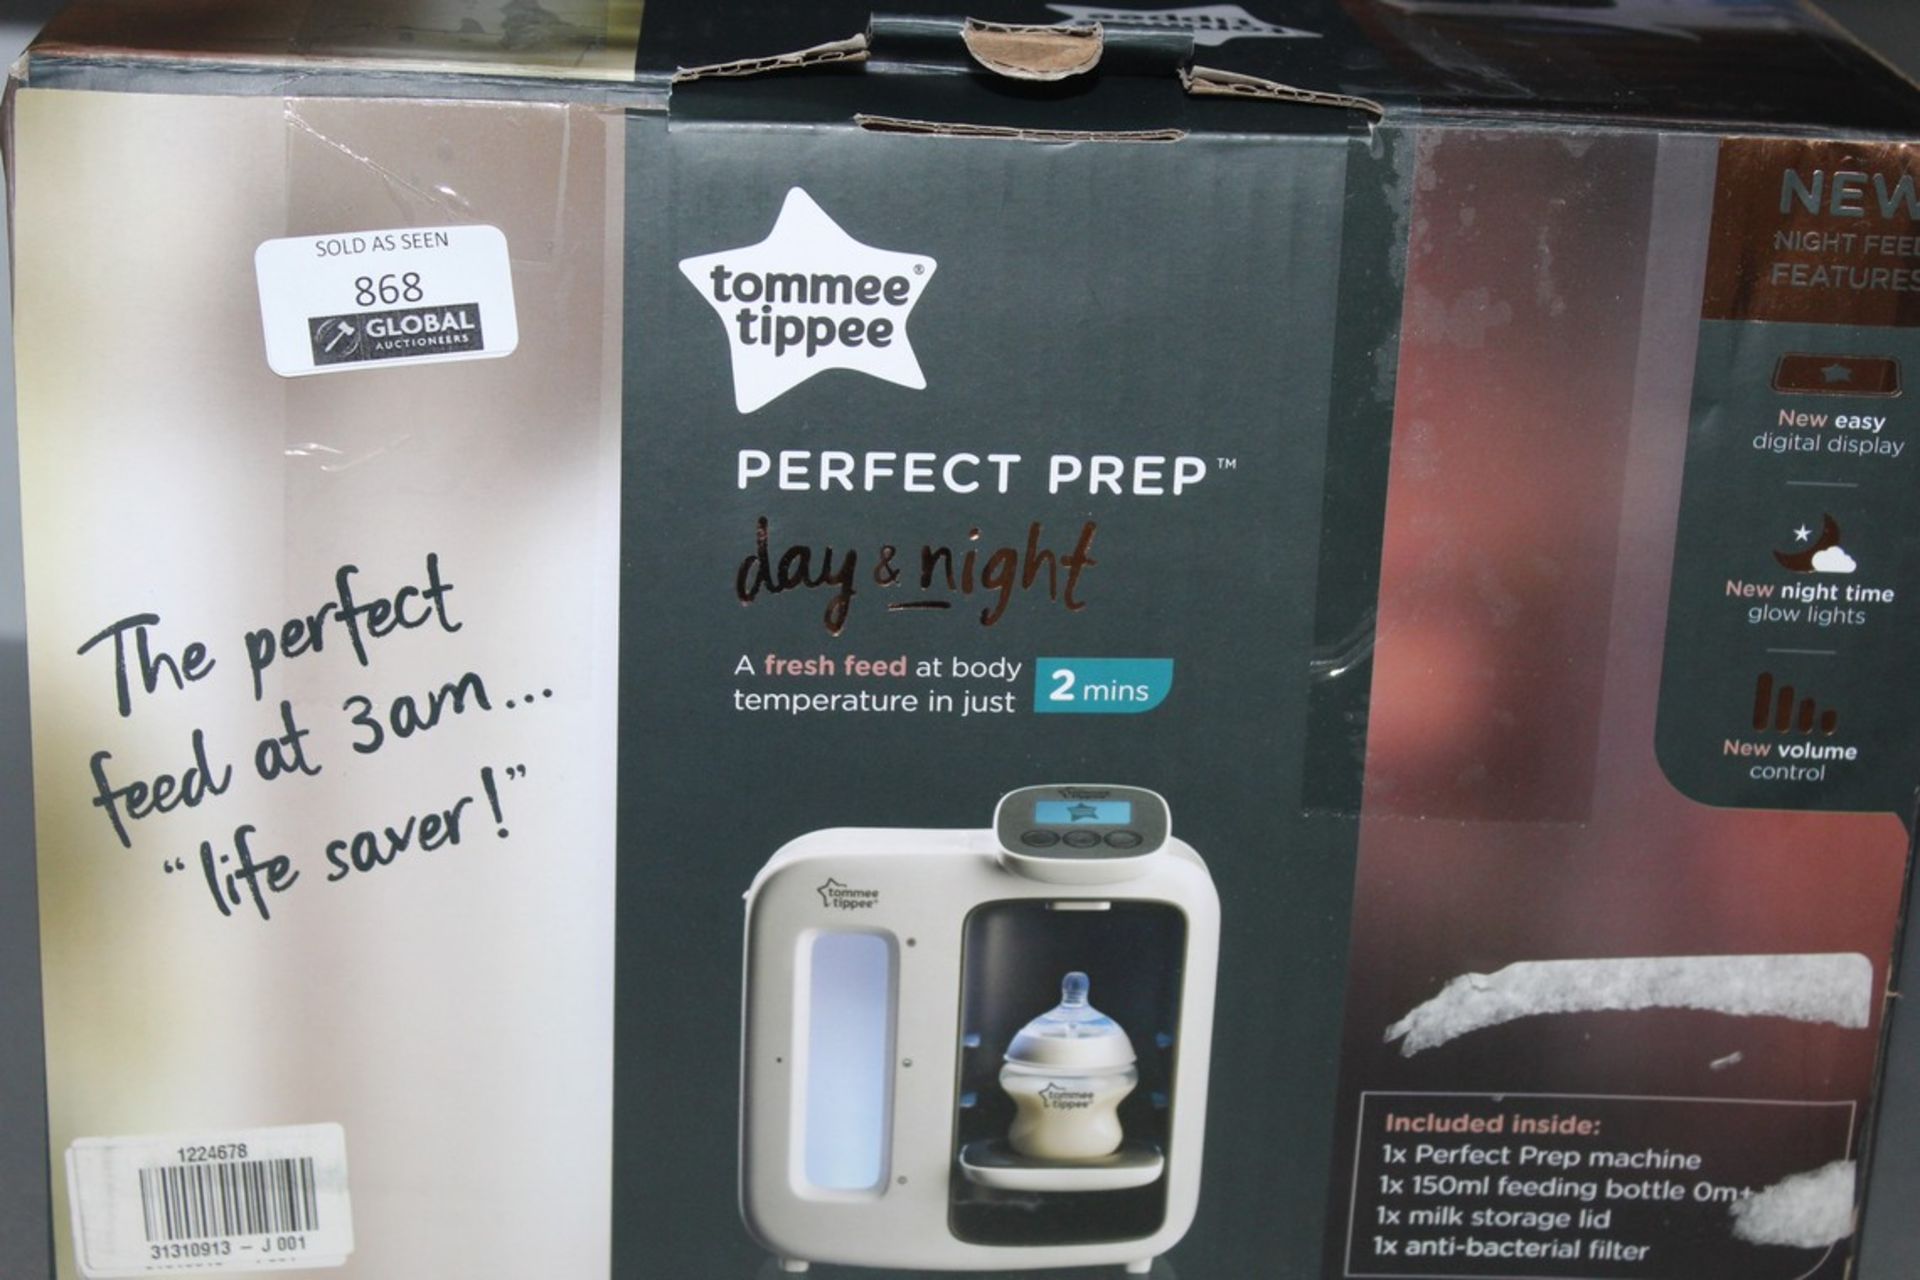 Boxed Tommee Tippee Perfect Preparation Day & Night Bottle Warming Station RRP £130 (1224678) (